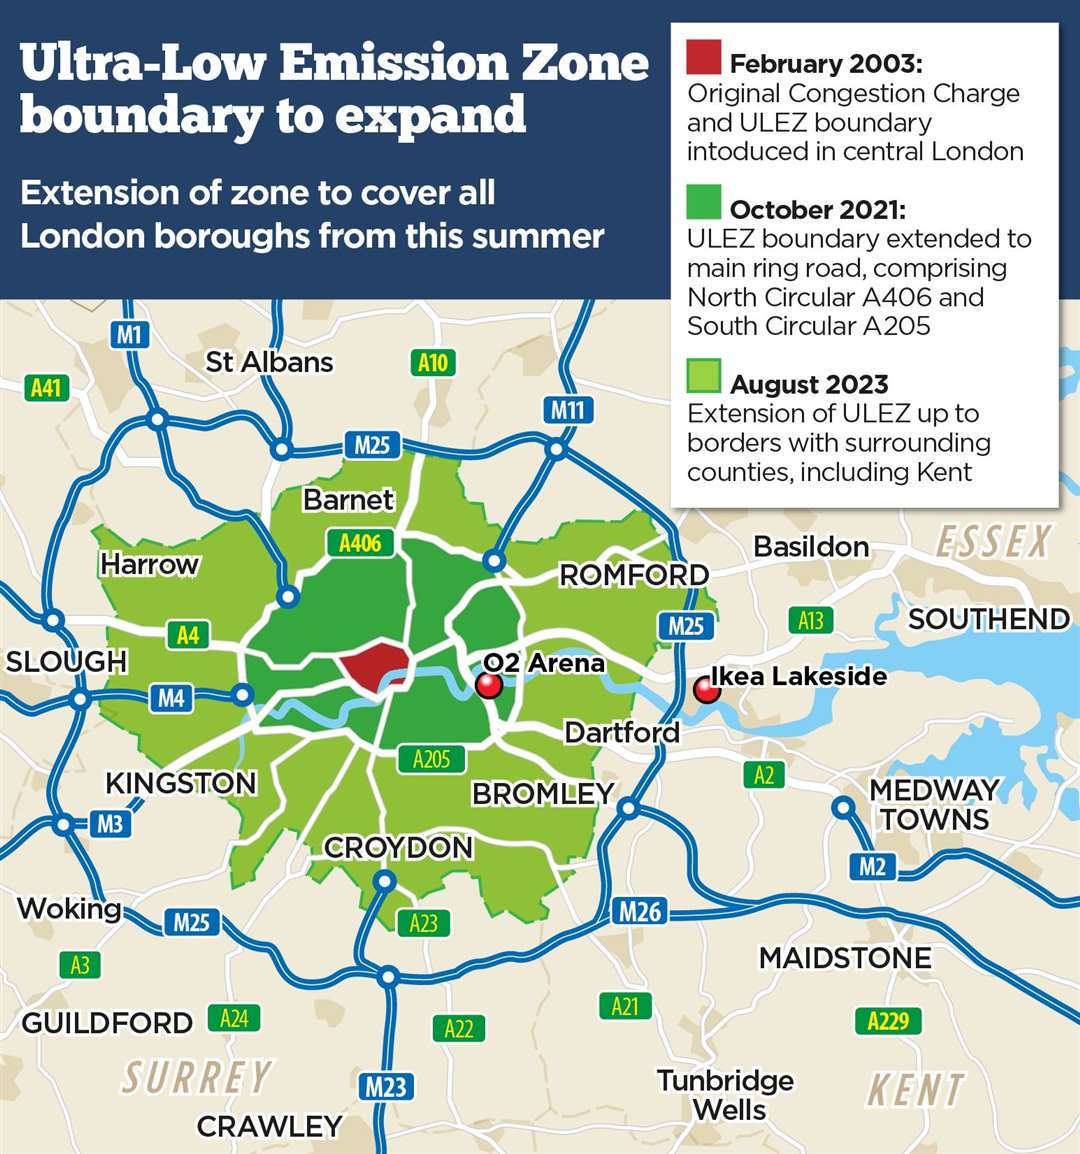 The ultra low emission zone will cover all London boroughs from this summer